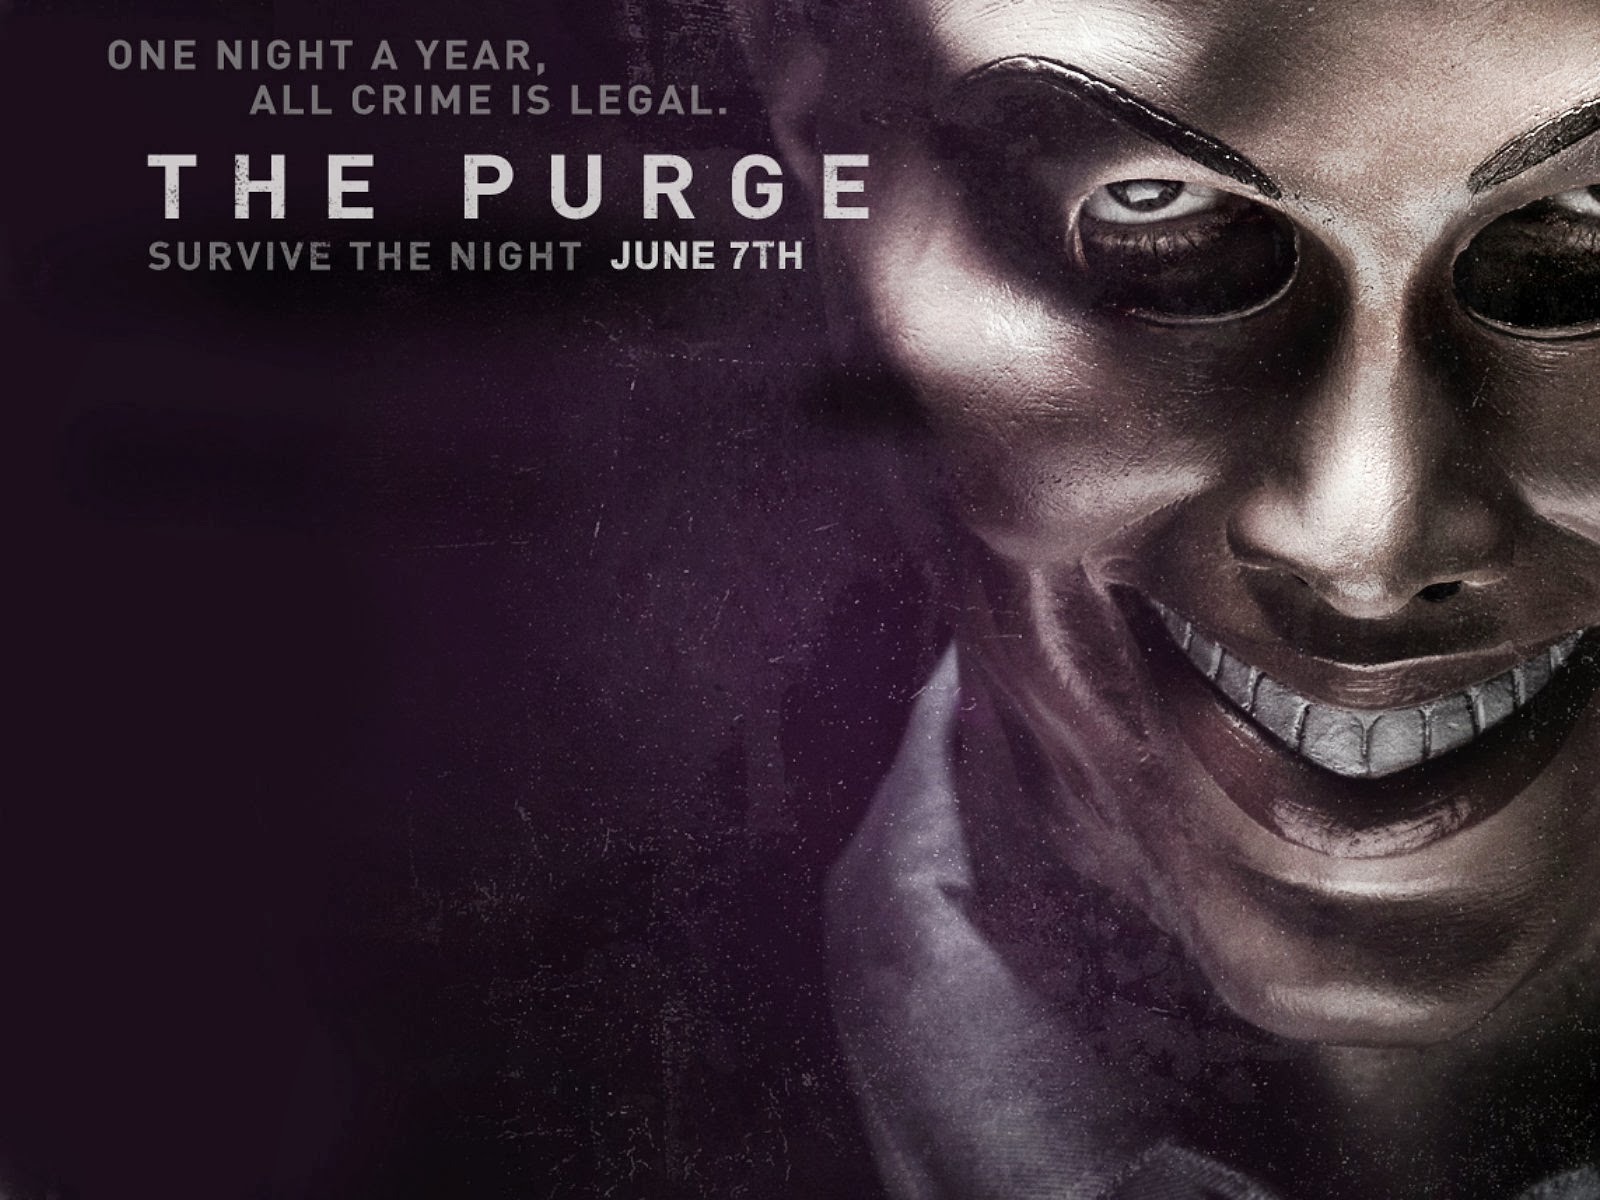 Free download wallpapers hd wallpapers movie the purge fondos x for your desktop mobile tablet explore the purge wallpaper hd the avenger wallpaper hd the punisher hd